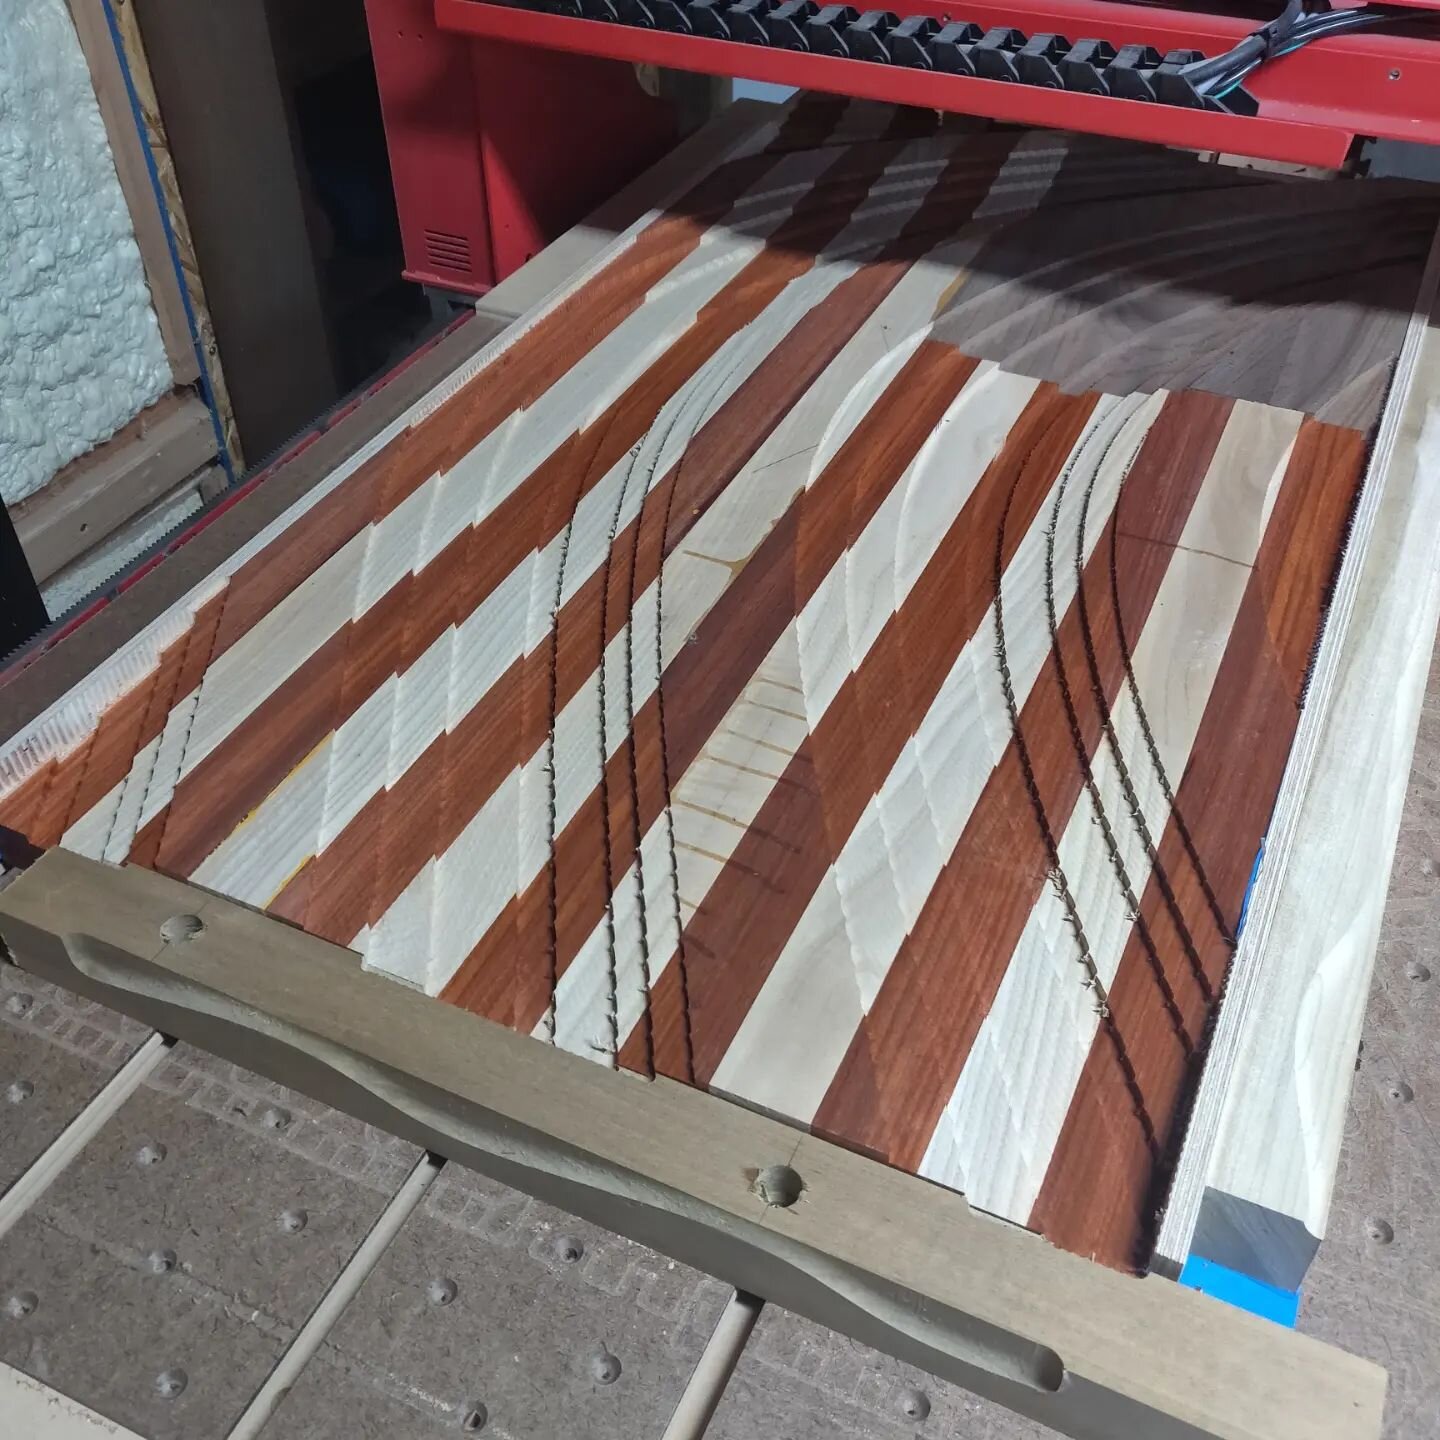 Another Padauk and Ash woods flag.  This one is 24 x 44.  I was going to do it as a blue line flag, however, I wanted to dye the blue instead of paint.  I ran out of time to figure out the dye process.  Hope to sand and apply the finish tonight.